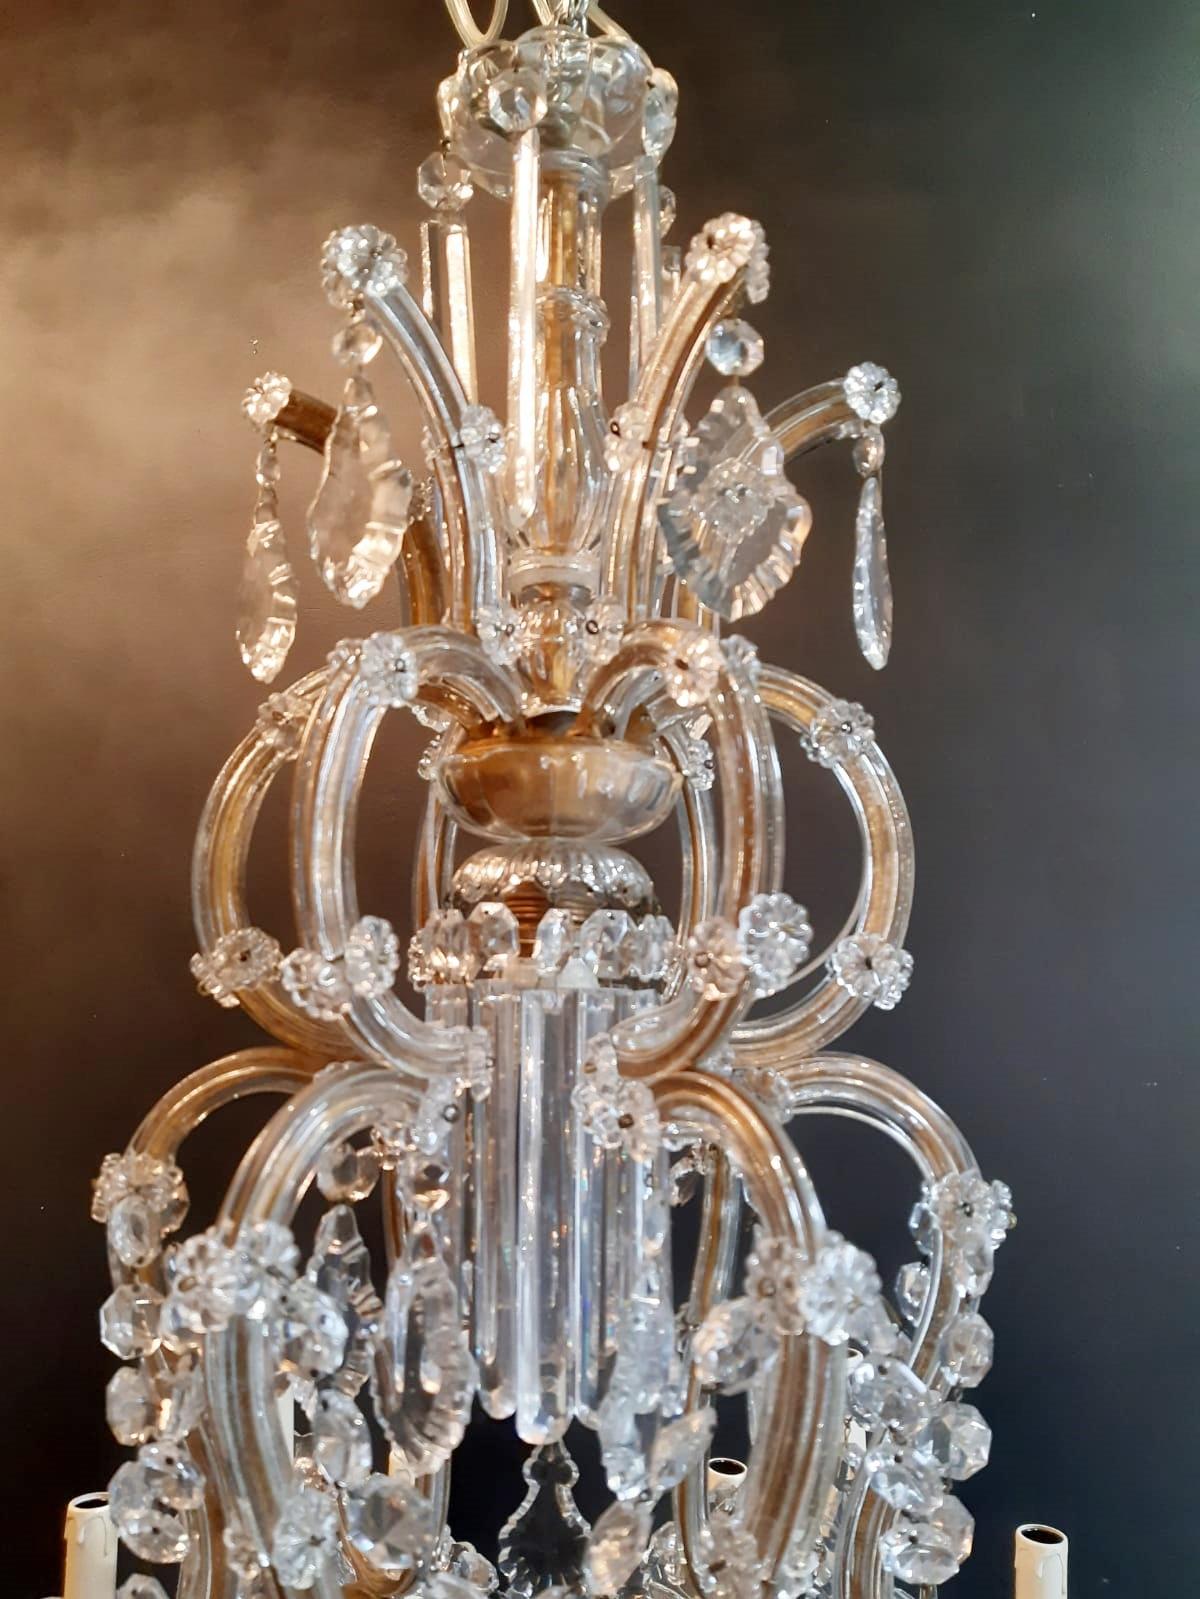 Hand-Crafted Nineteen-Light Maria Theresa Chandelier Antique Ceiling Lamp Lustre Art Nouveau